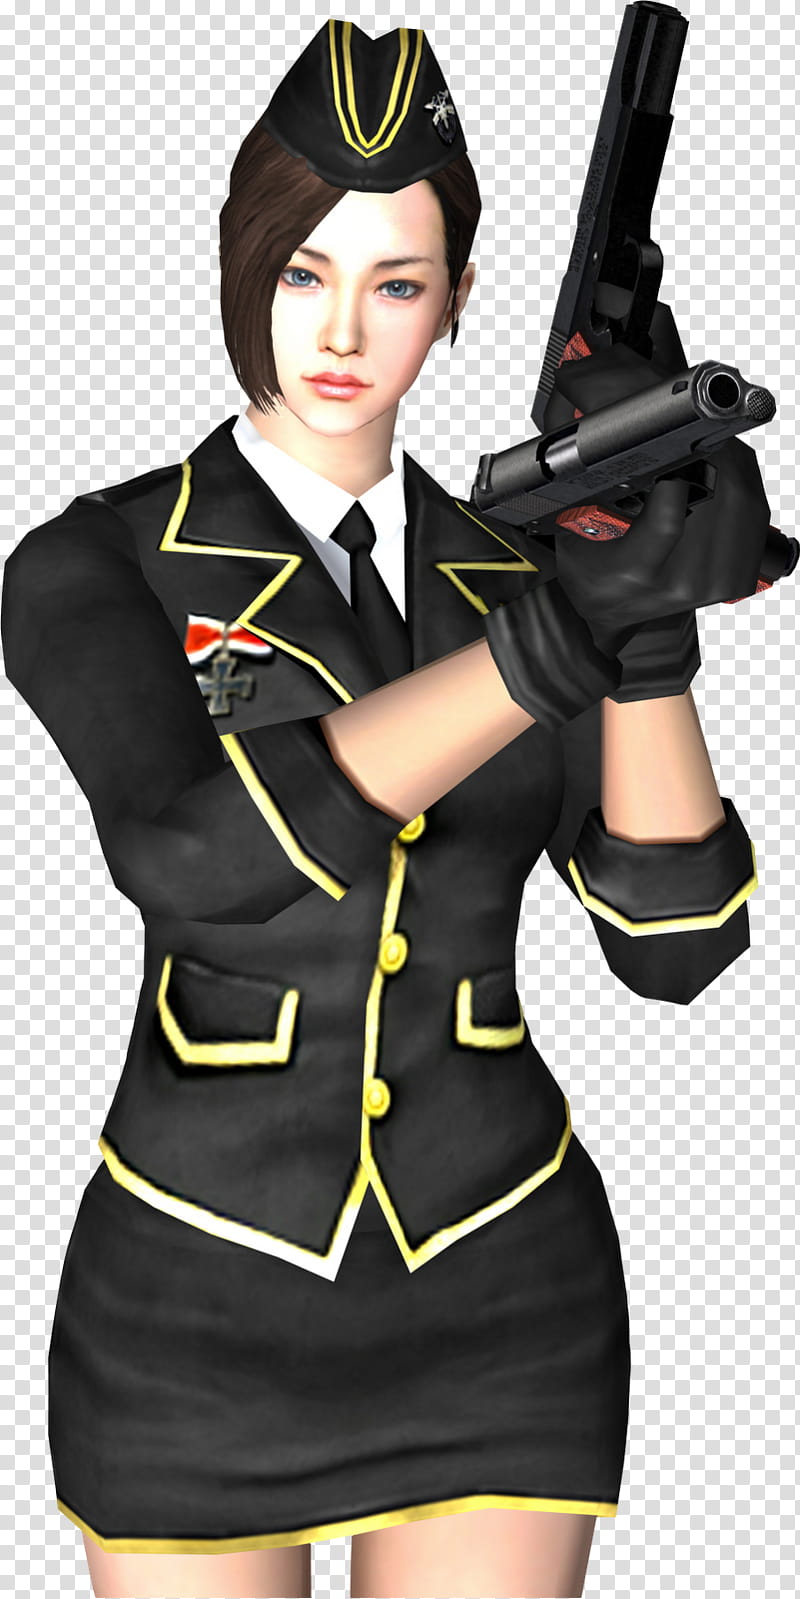 Police Uniform, CrossFire, Counterstrike, World Cyber Games 2012, Video Games, Killzone Mercenary, Z8games, Frag transparent background PNG clipart